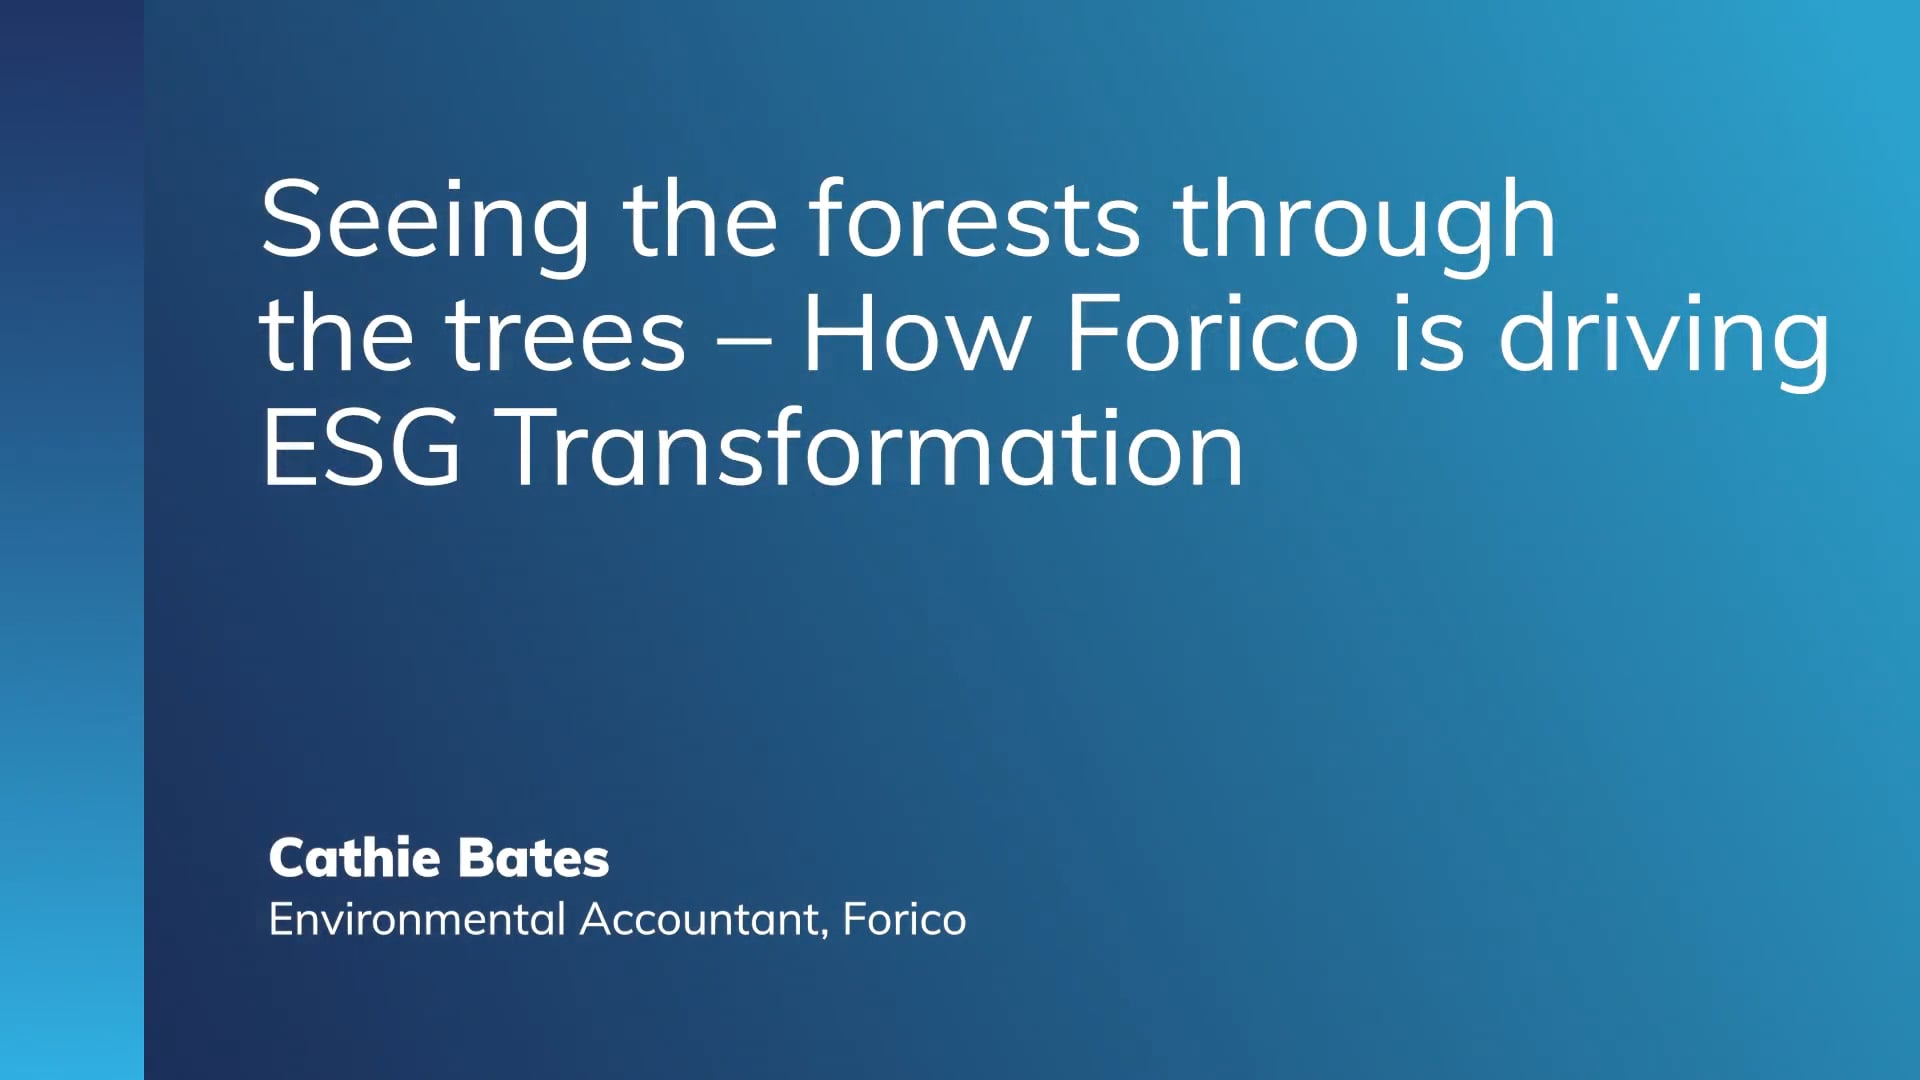 Board in Action: Seeing the forests through the trees – How Forico is driving ESG Transformation